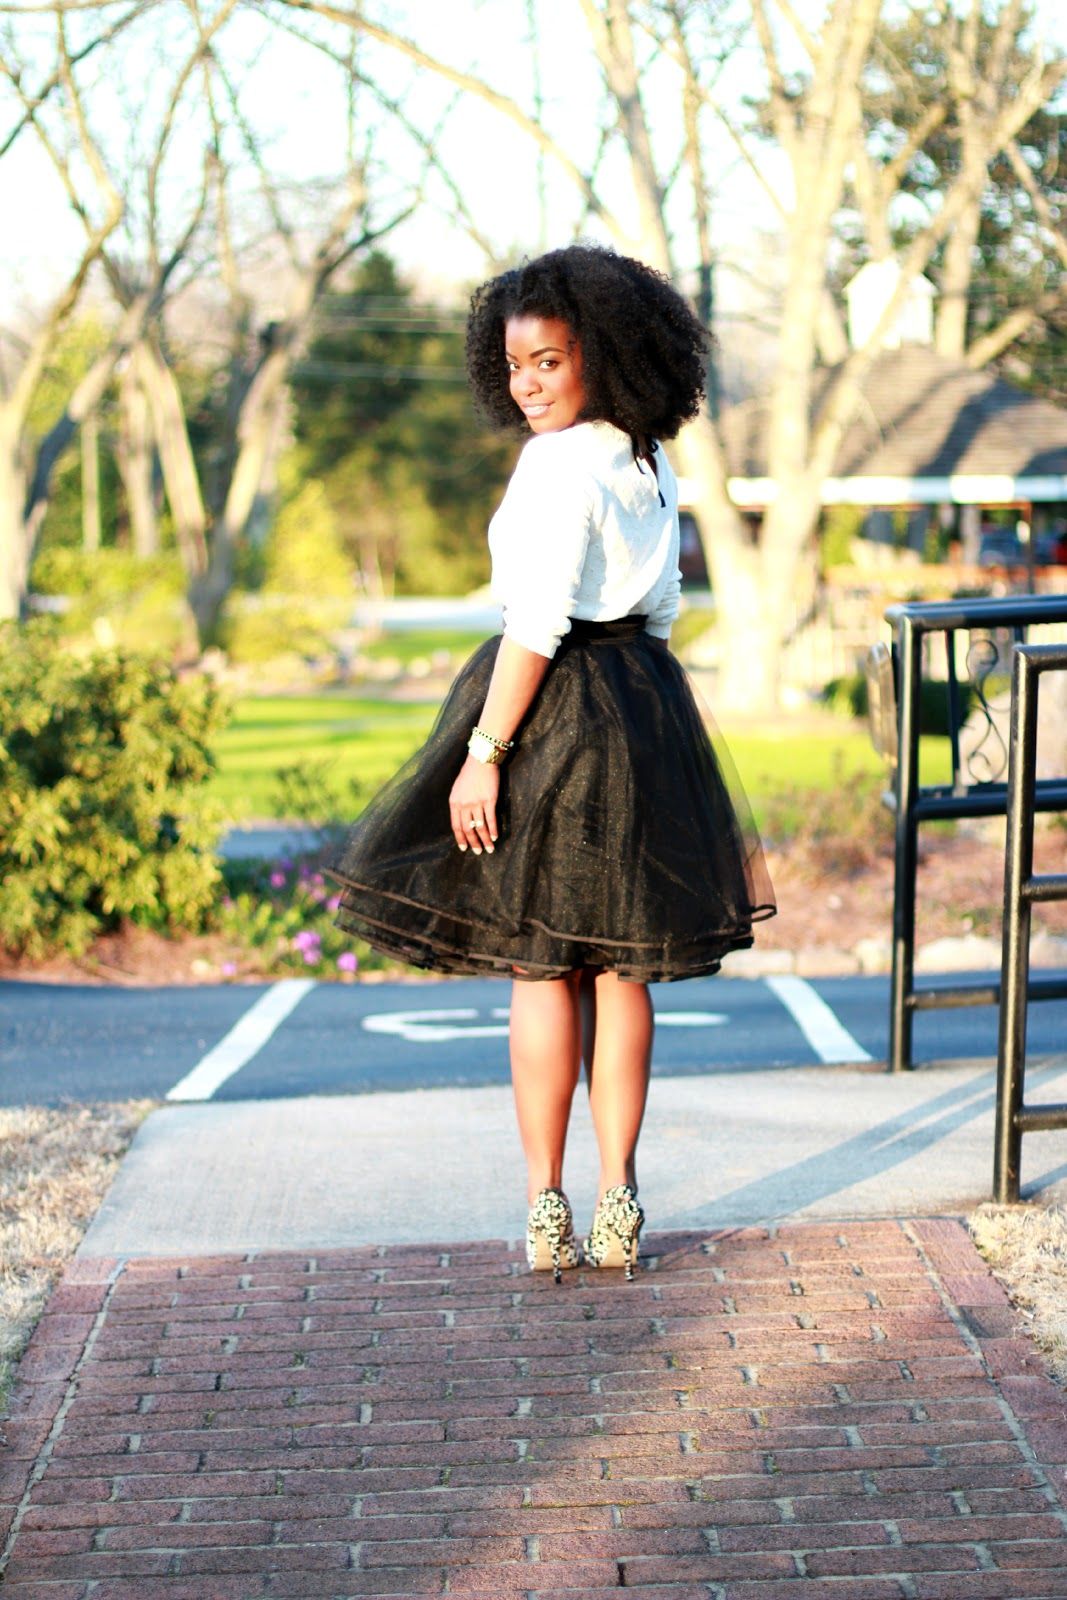 Black Tulle Skirt Outfit Ideas